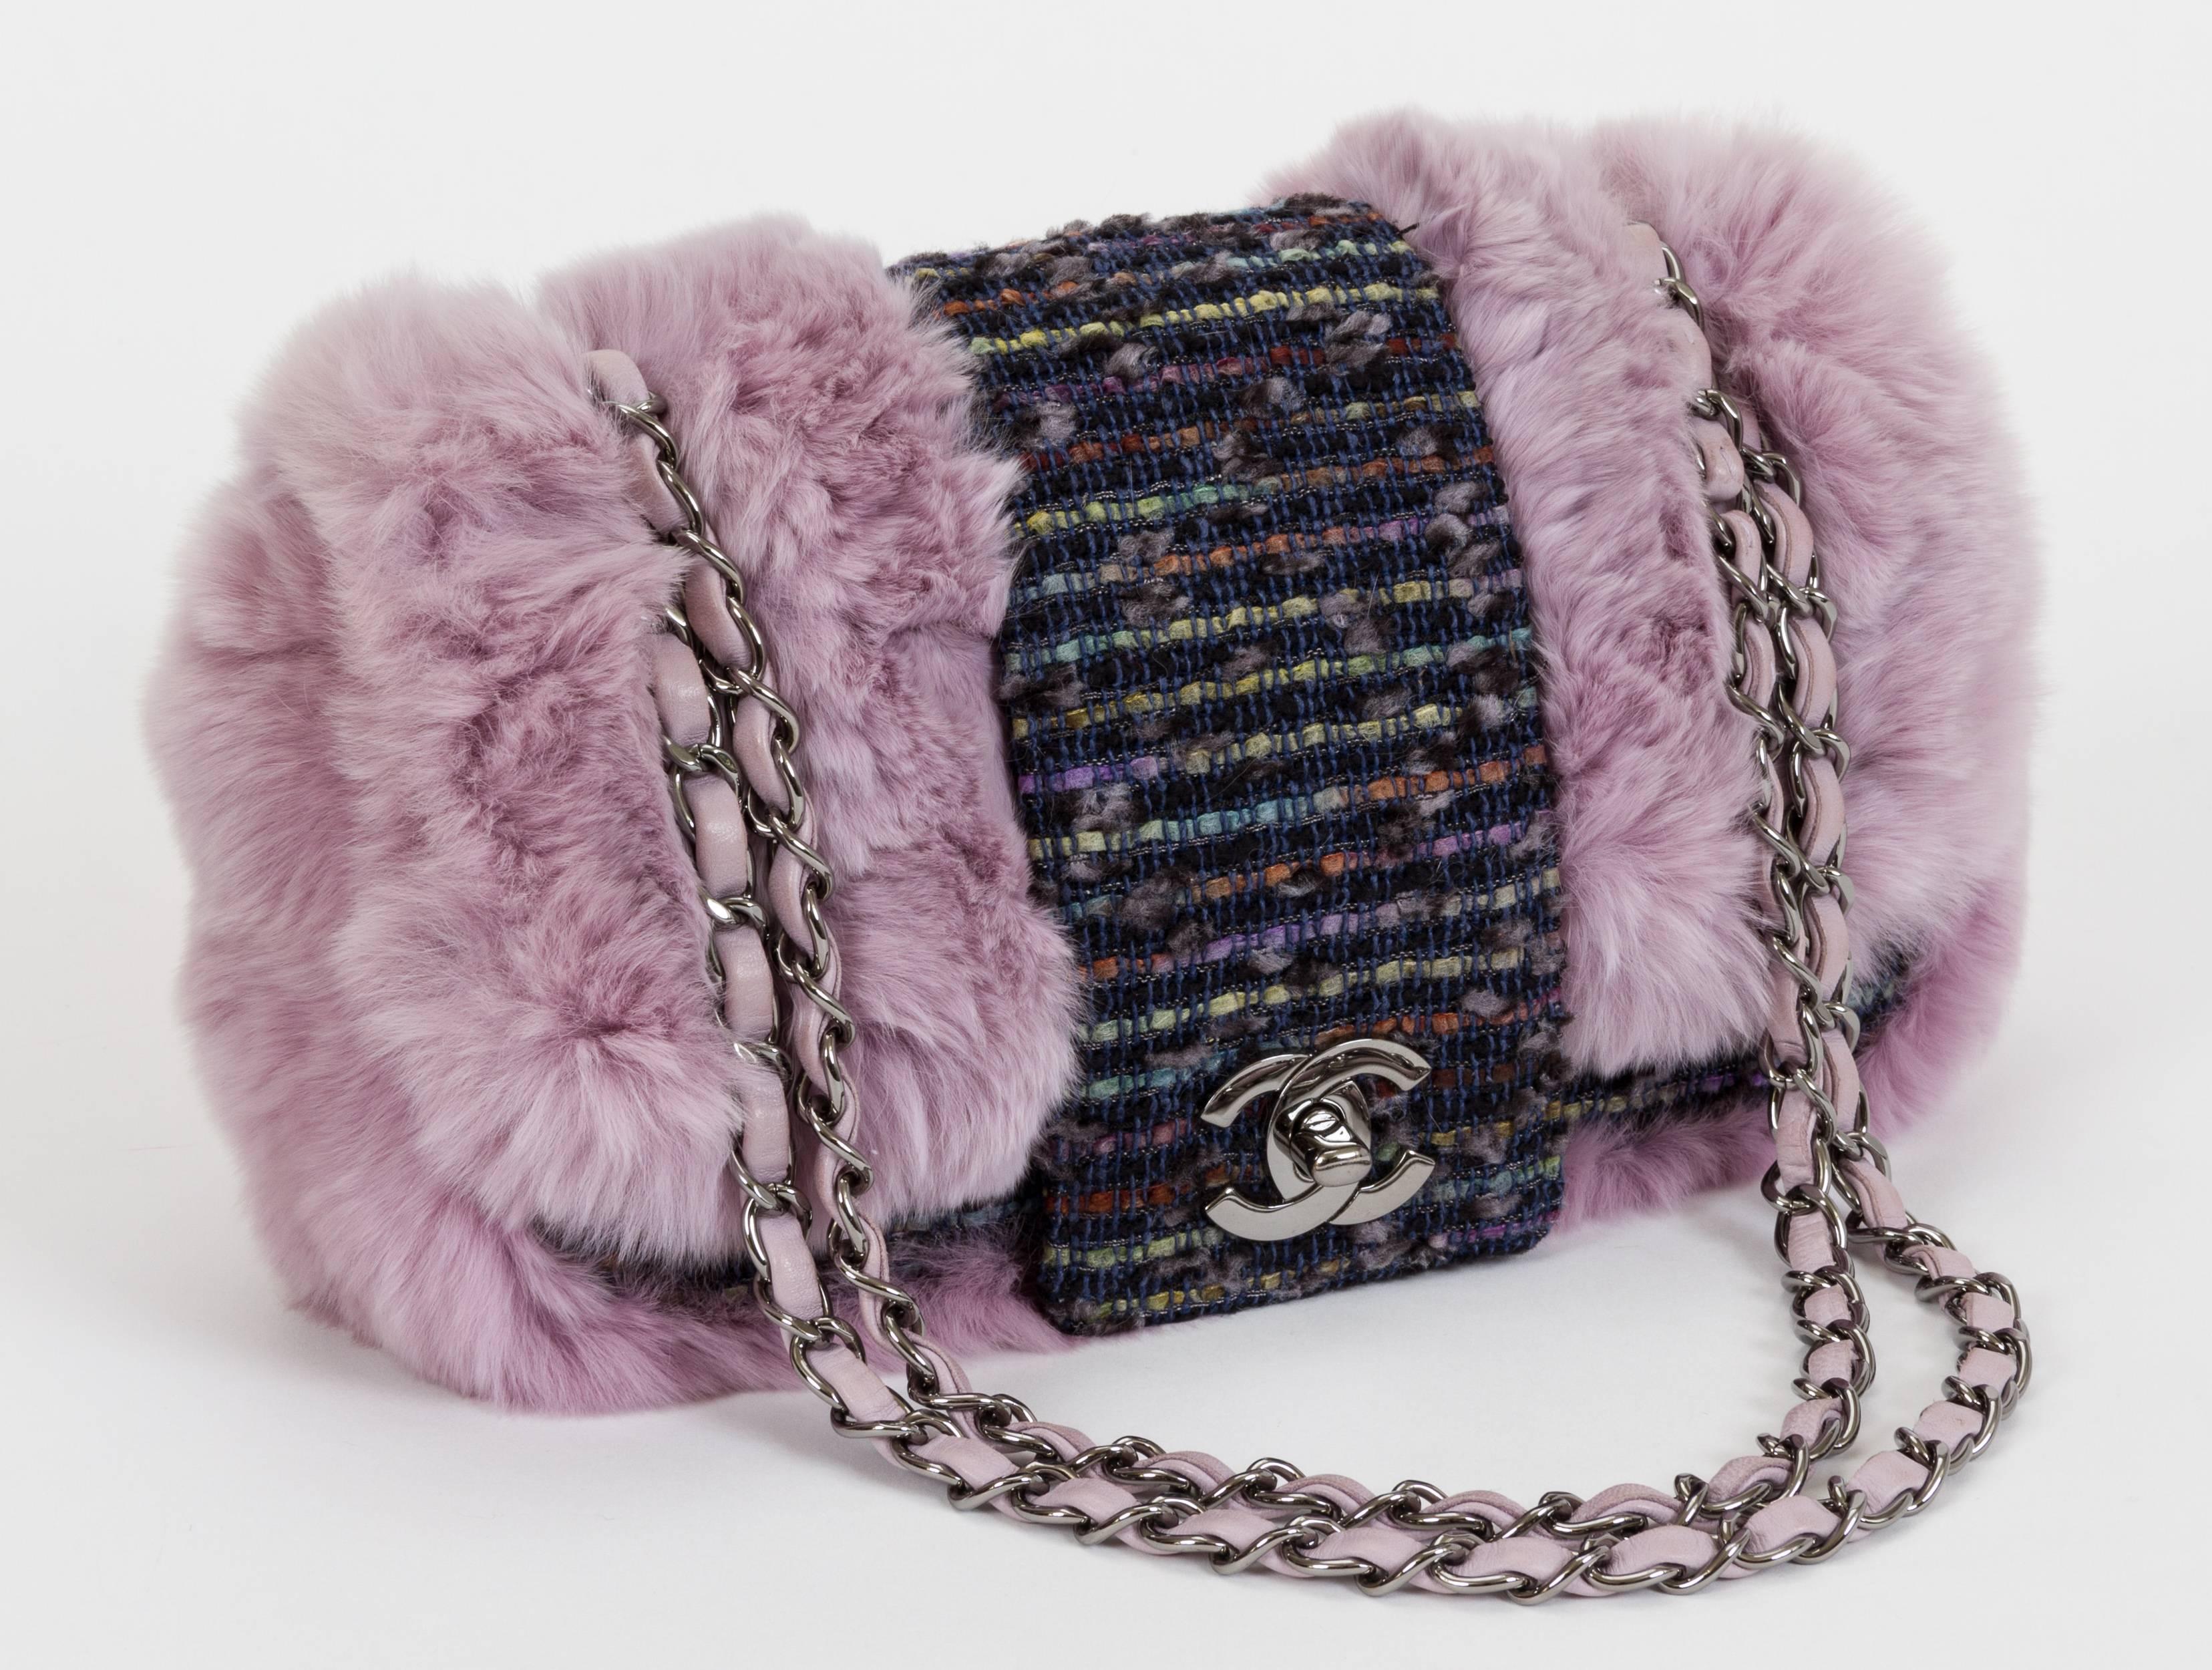 Chanel tweed and glicine lapin fur single-flap bag. Shoulder strap, 9"L/17"L. Comes with hologram, ID card, and original box.